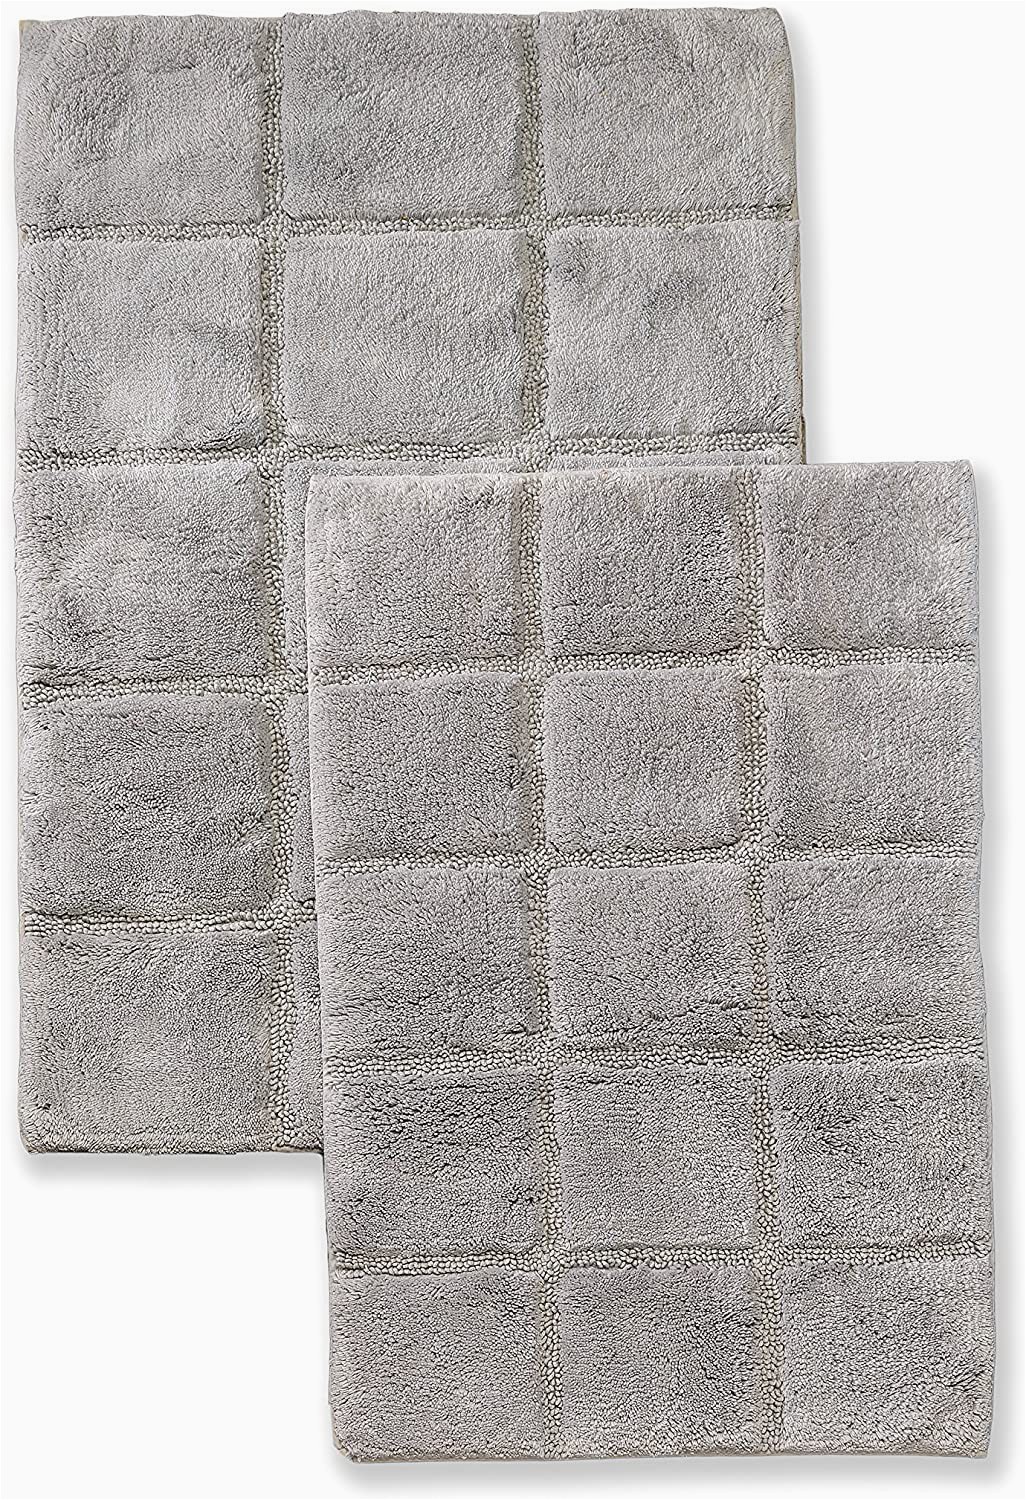 Non Slip Bathroom Rugs for Elderly Superior Non Slip Bath Rug 2 Pack Ultra Plush soft and Absorbent Bed Cotton Pile Contemporary Checkered Bath Mat Set Silver